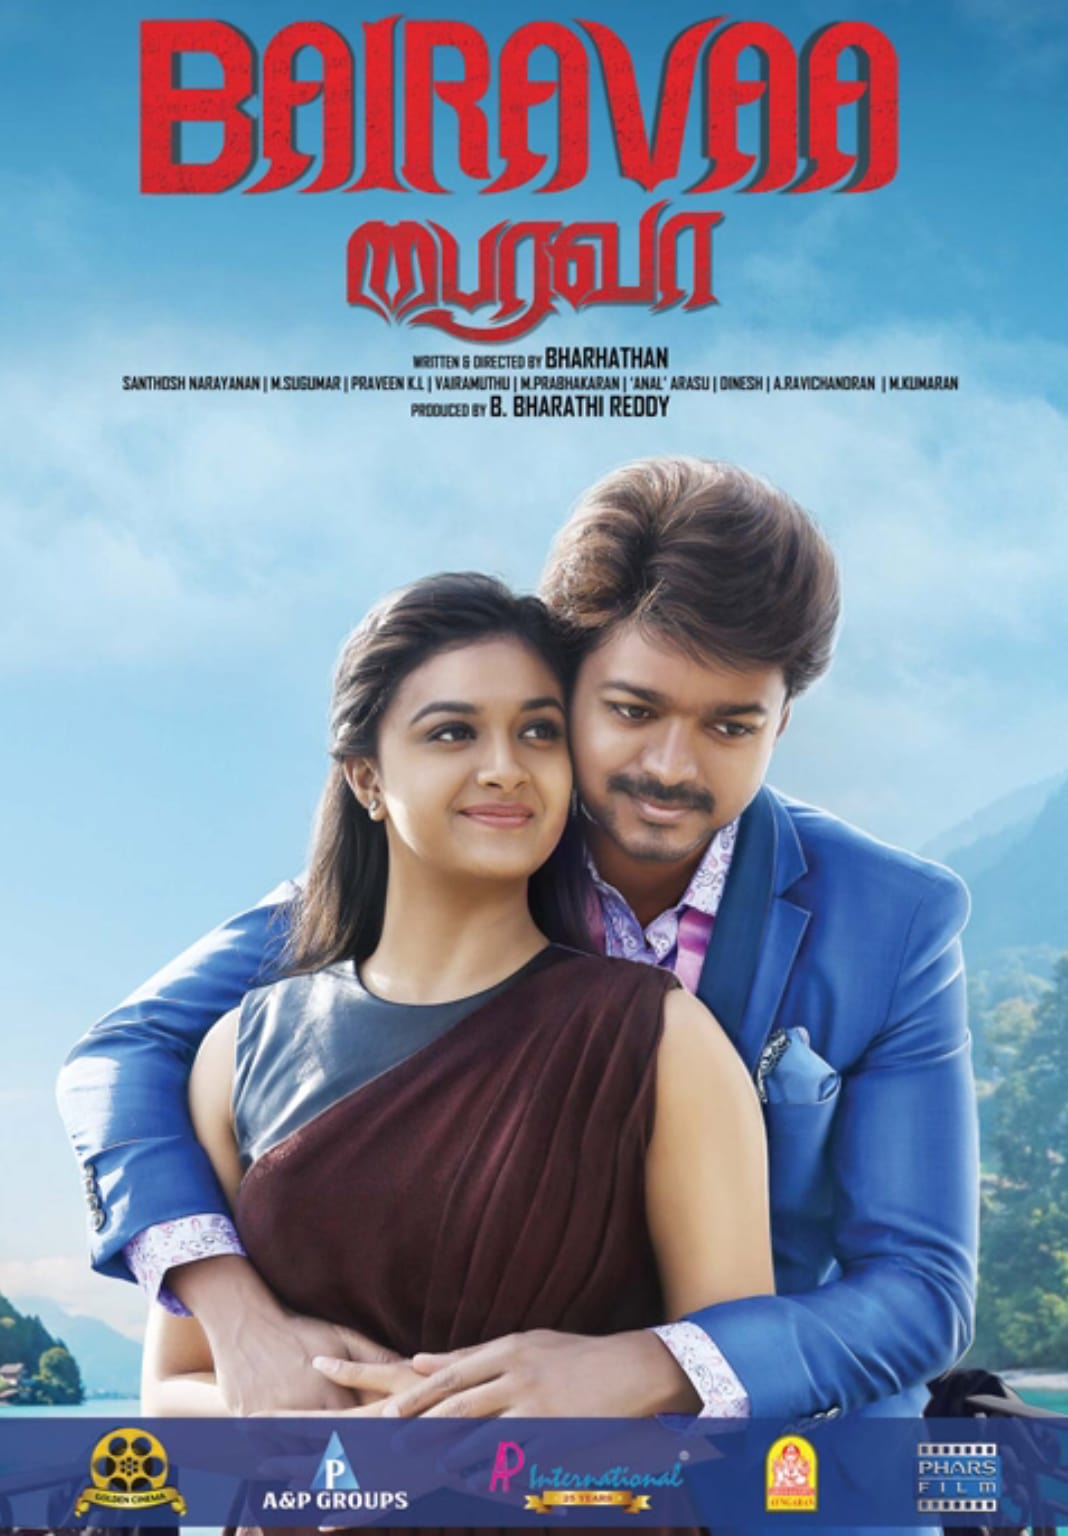 Poster for the movie "Bairavaa"